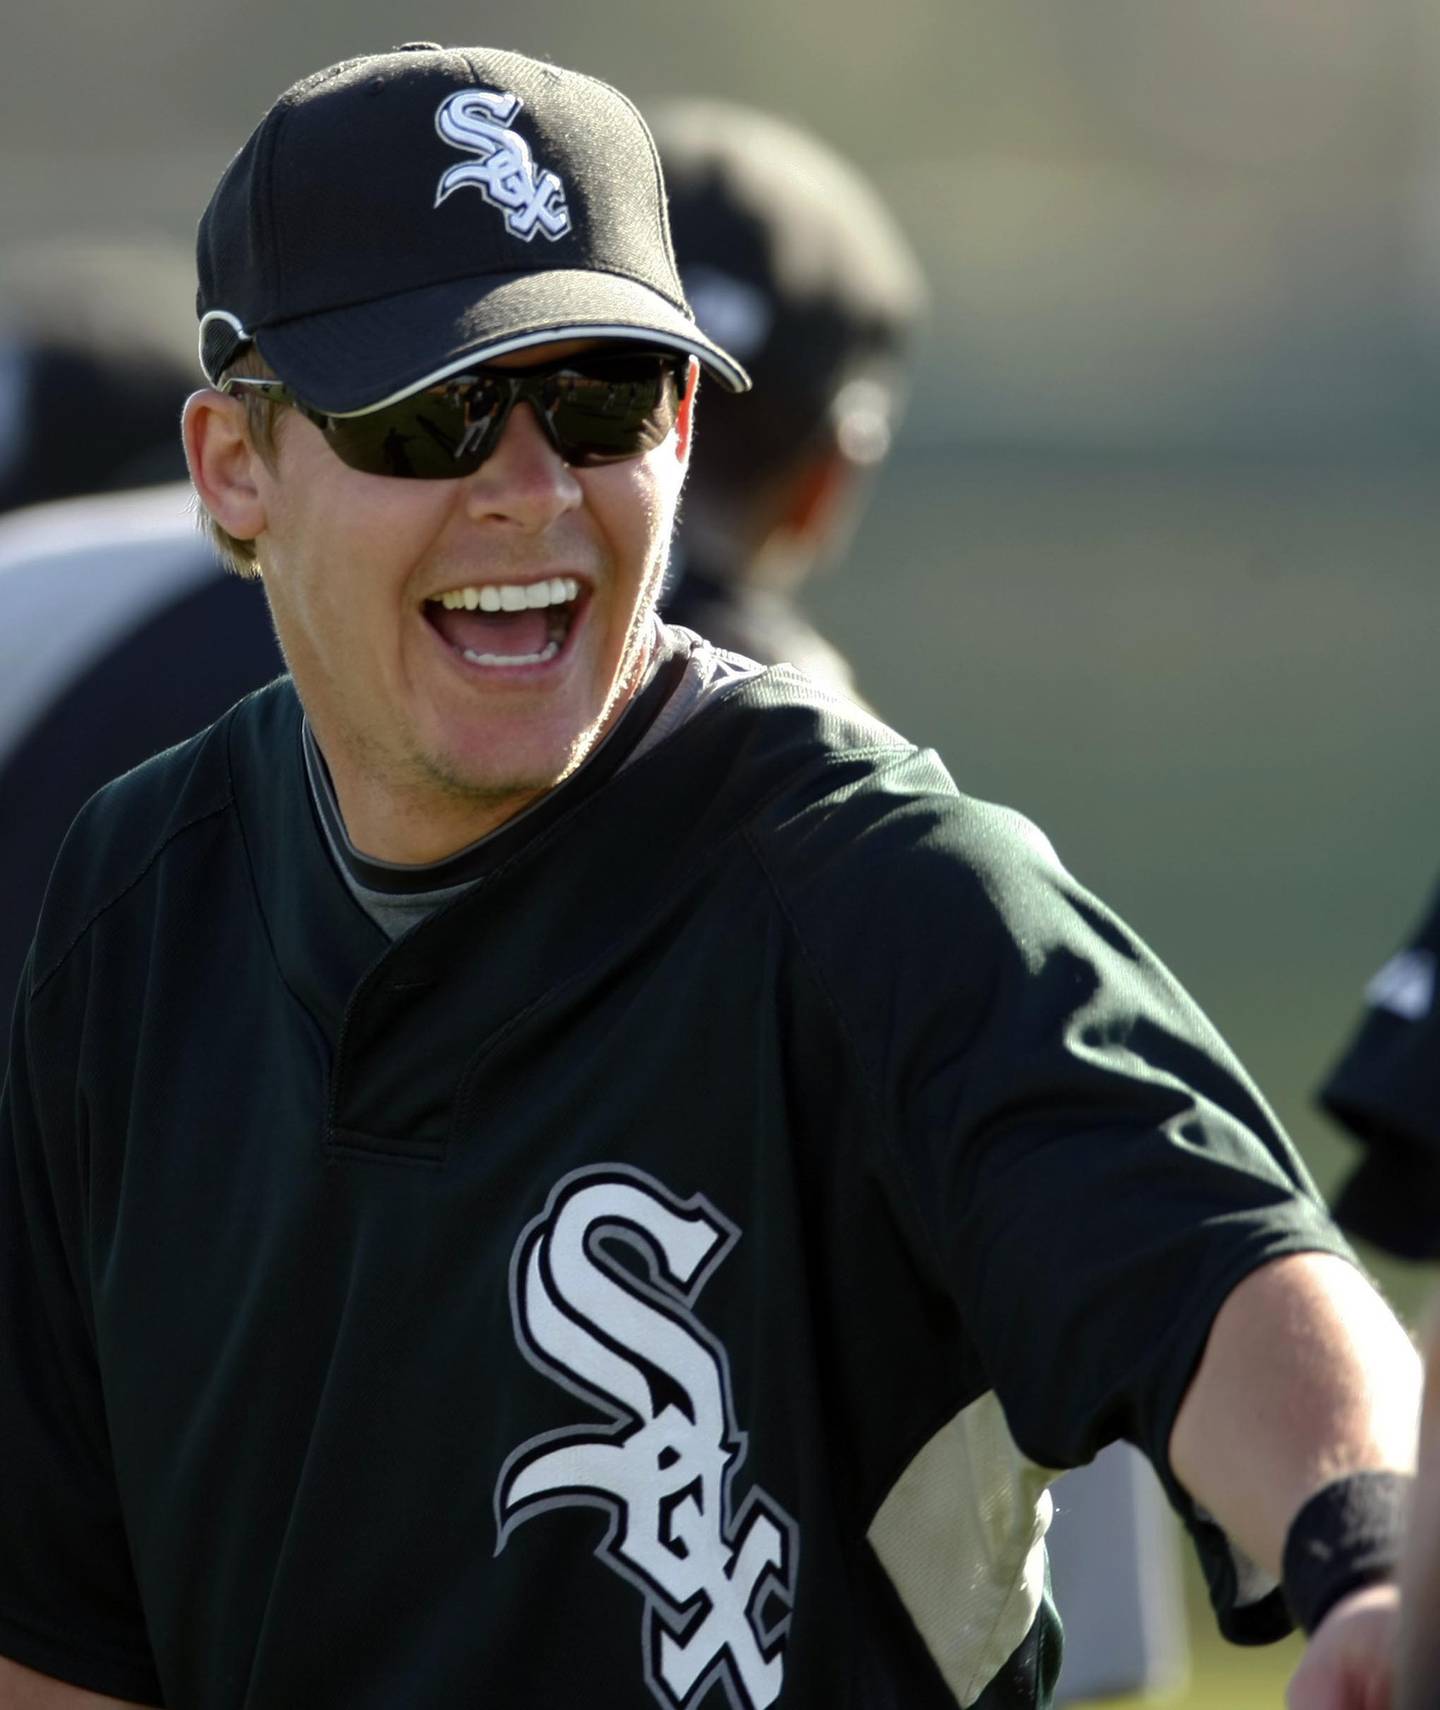 Chris Getz at White Sox spring training in 2009.